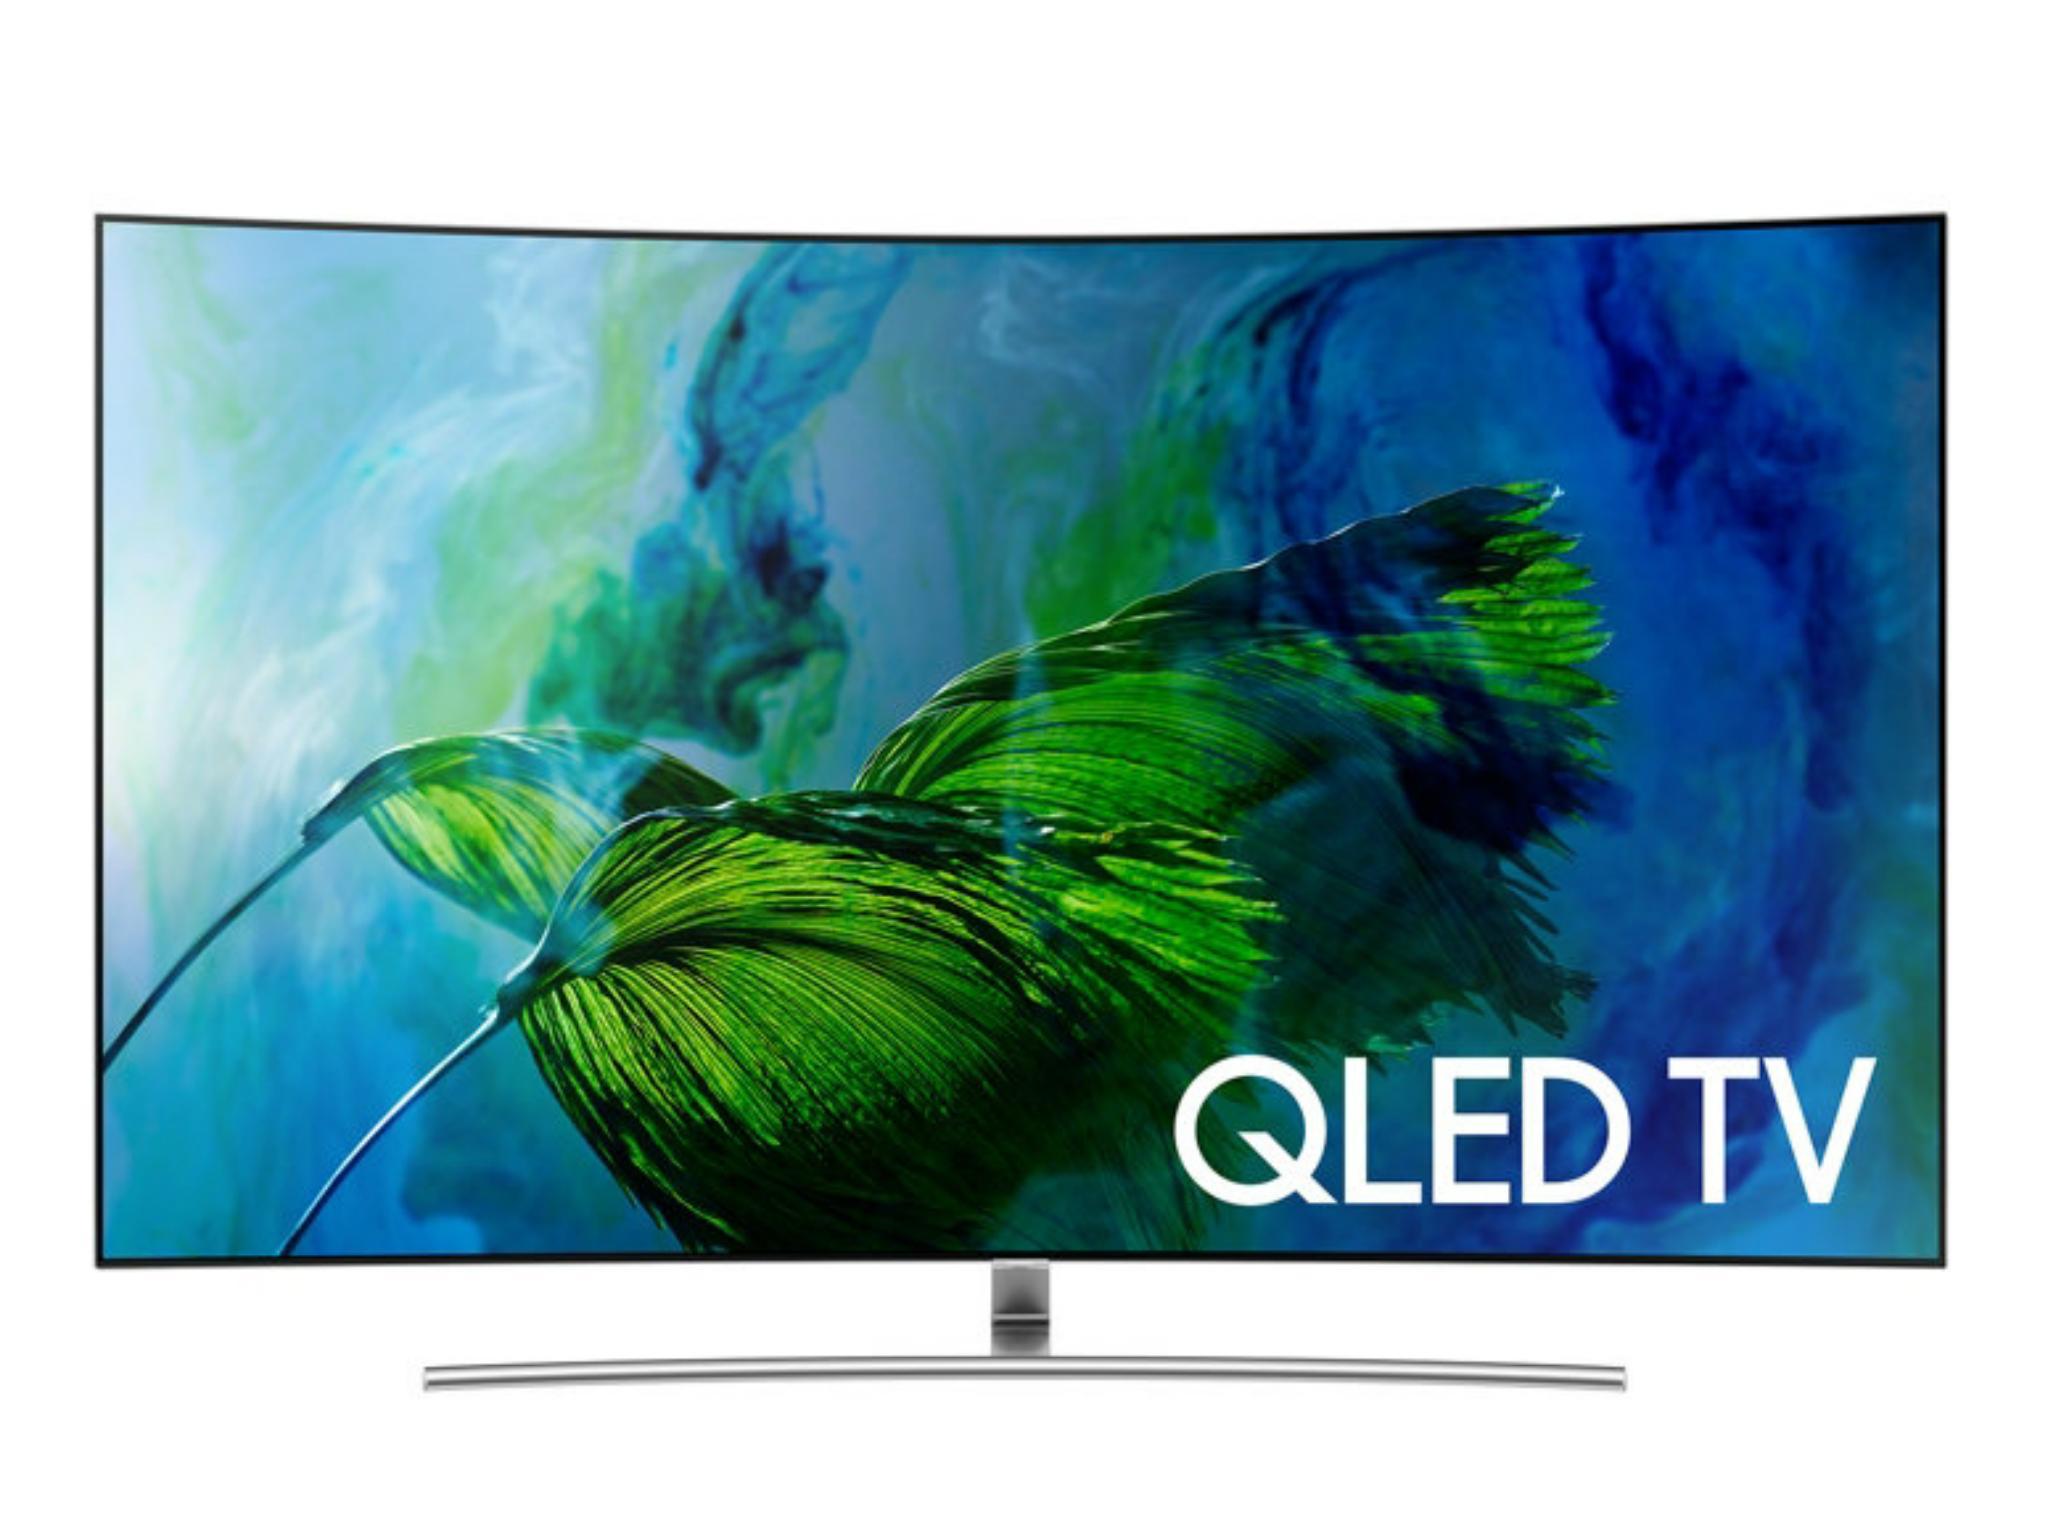 It’s an advanced version of an LED TV, where the Q refers to the fact that this uses a layer of nano-sized particles called Quantum Dots